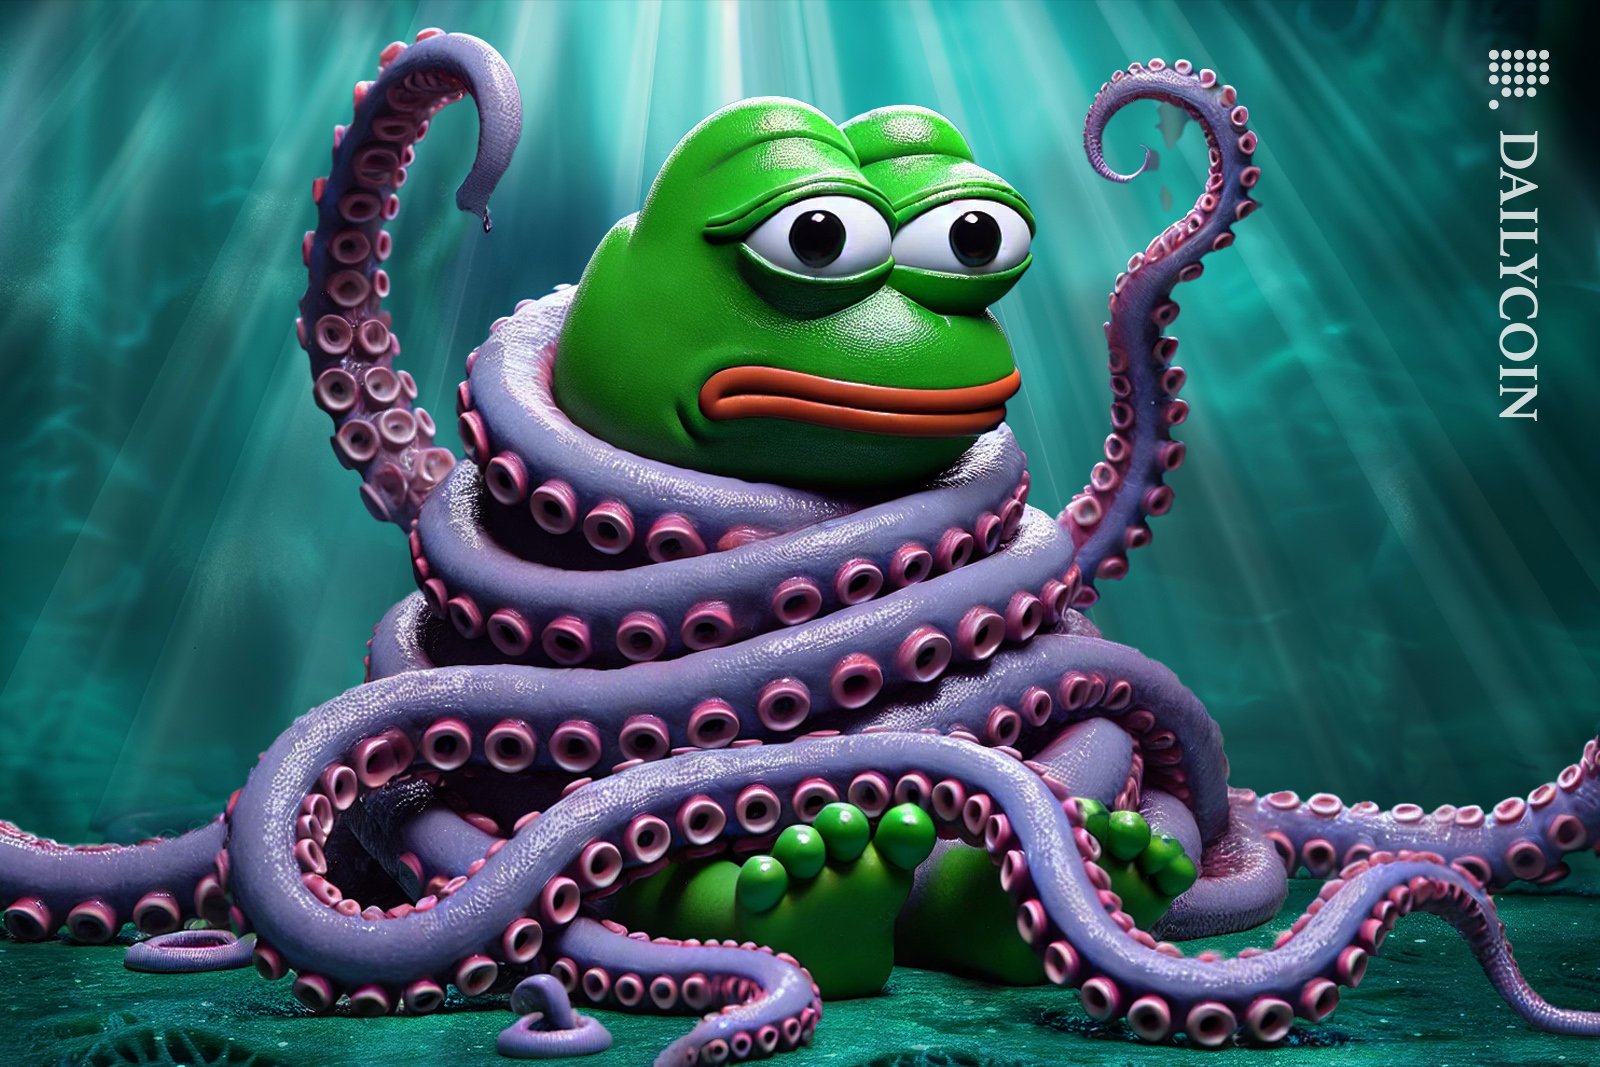 Pepe wrapped up with Kraken tentacles at the bottom of the ocean.